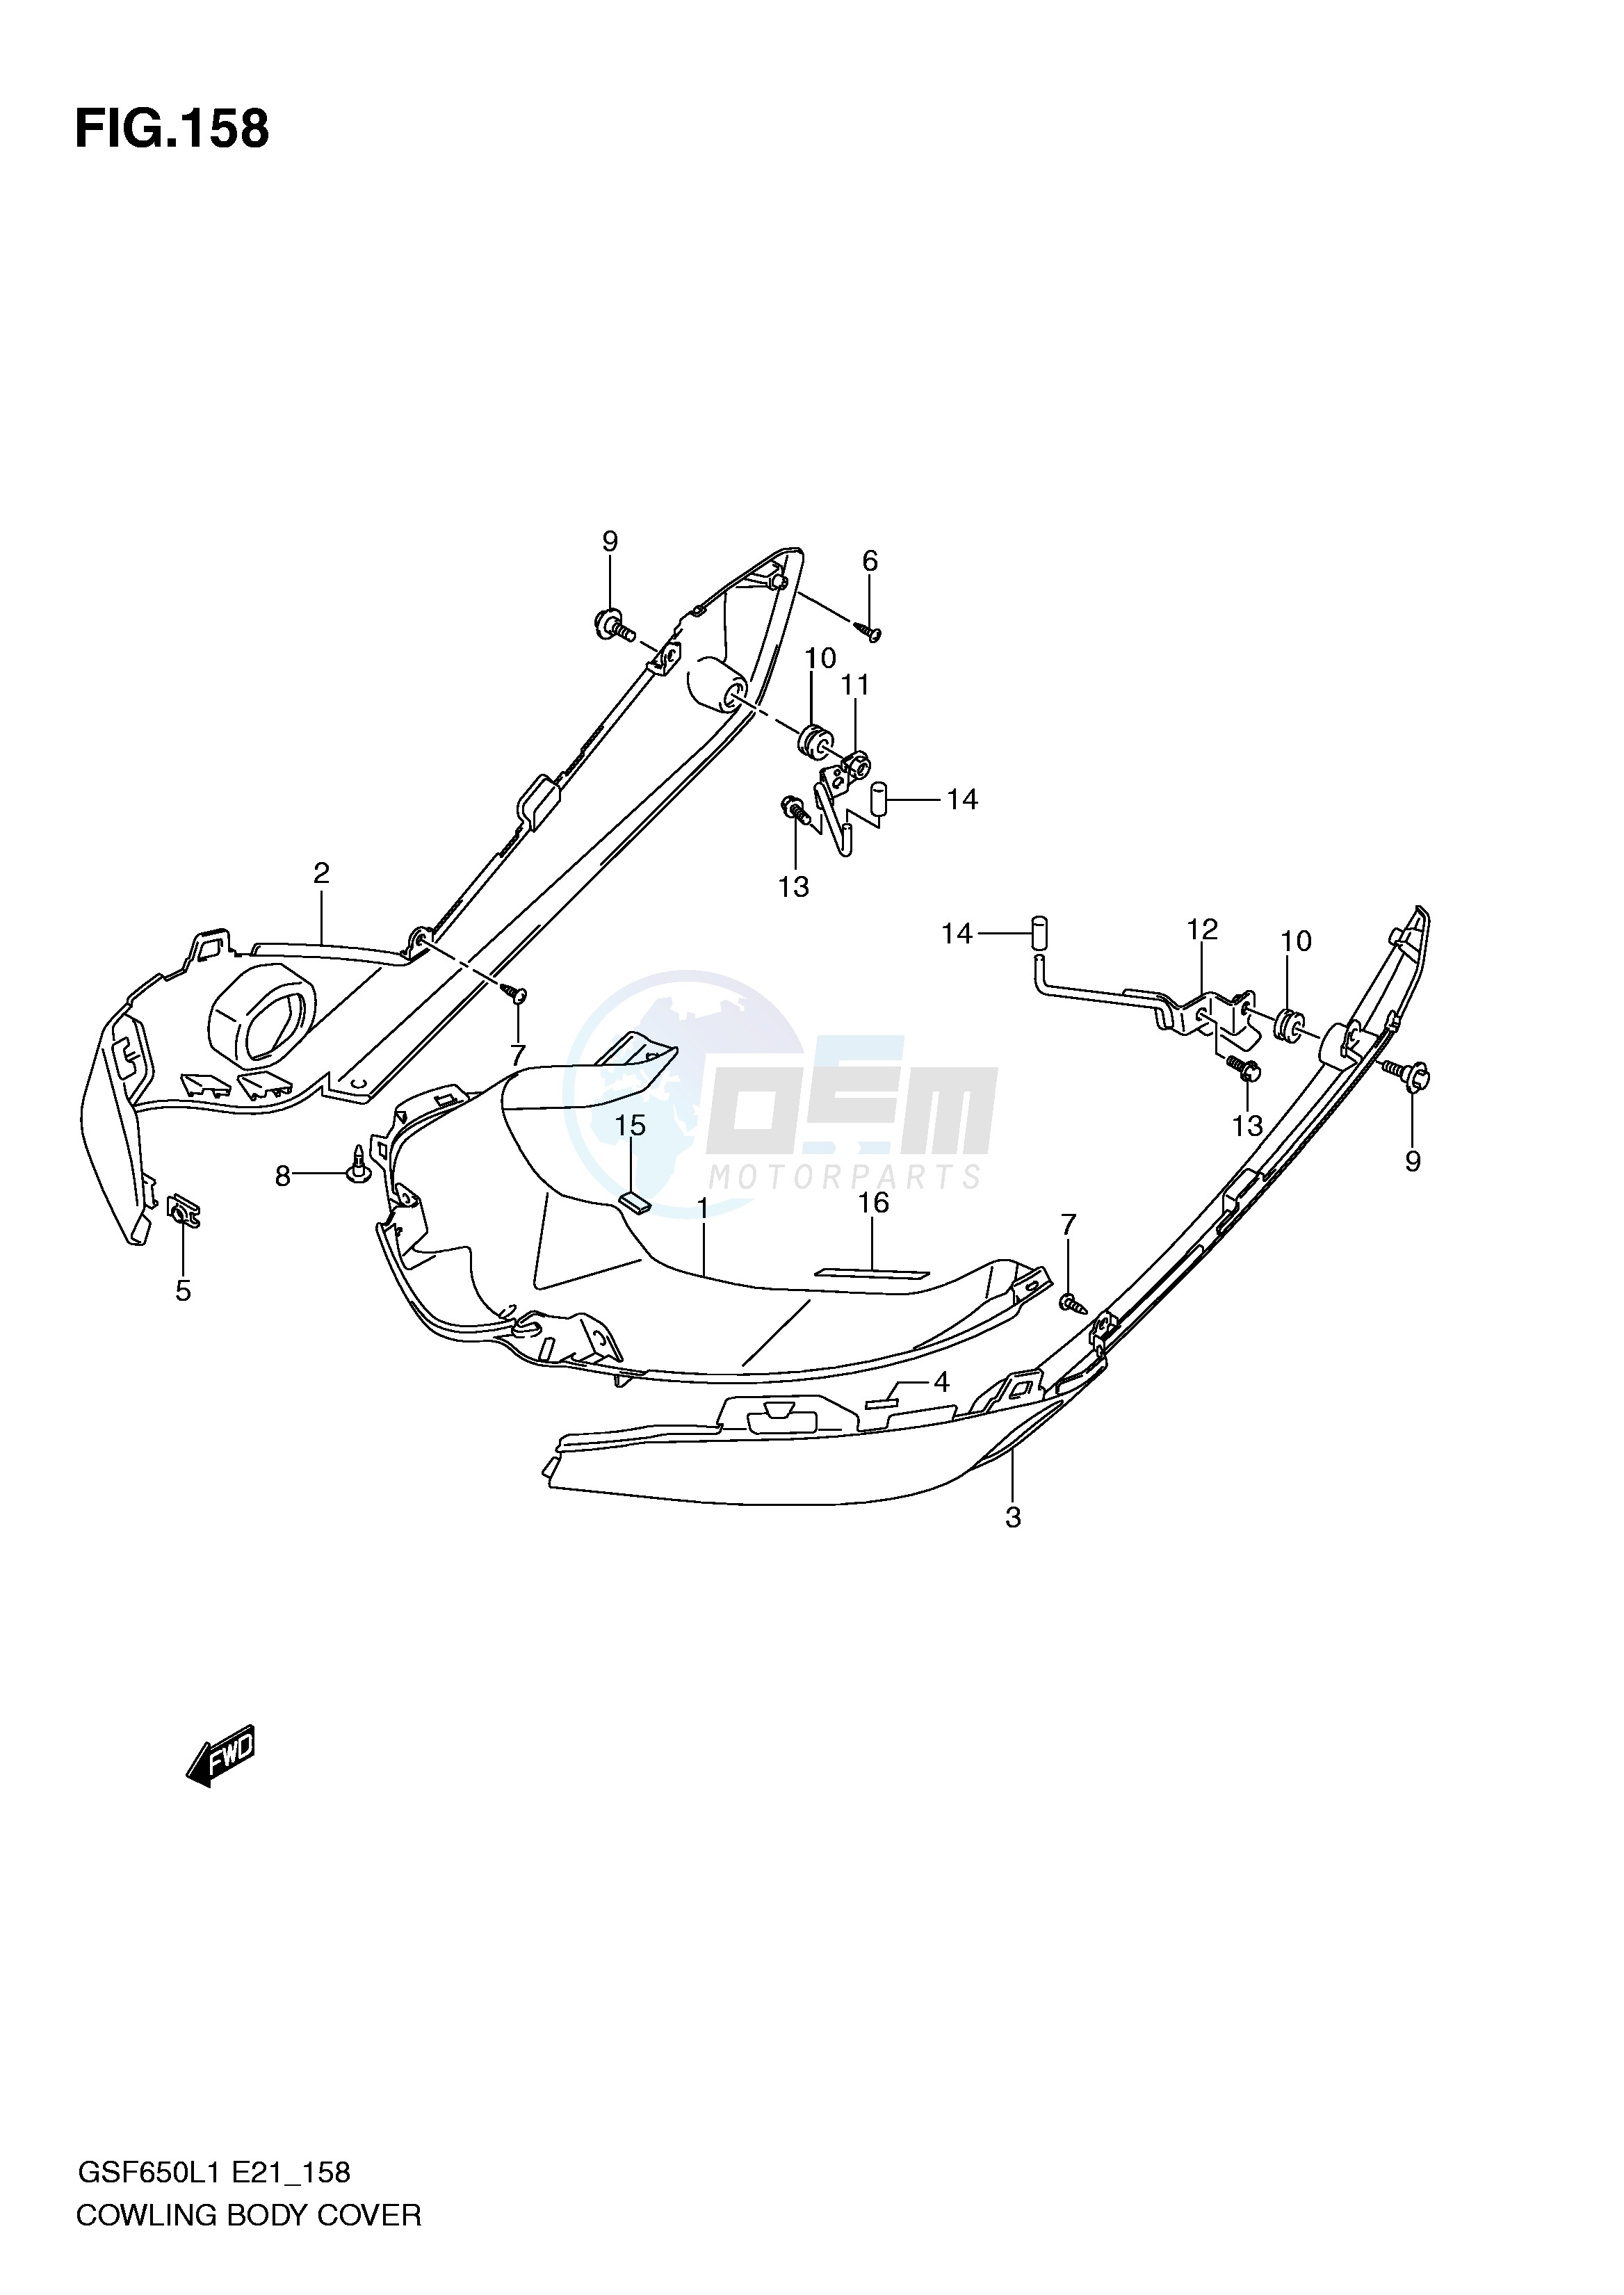 COWLING BODY COVER (GSF650SUAL1 E21) blueprint